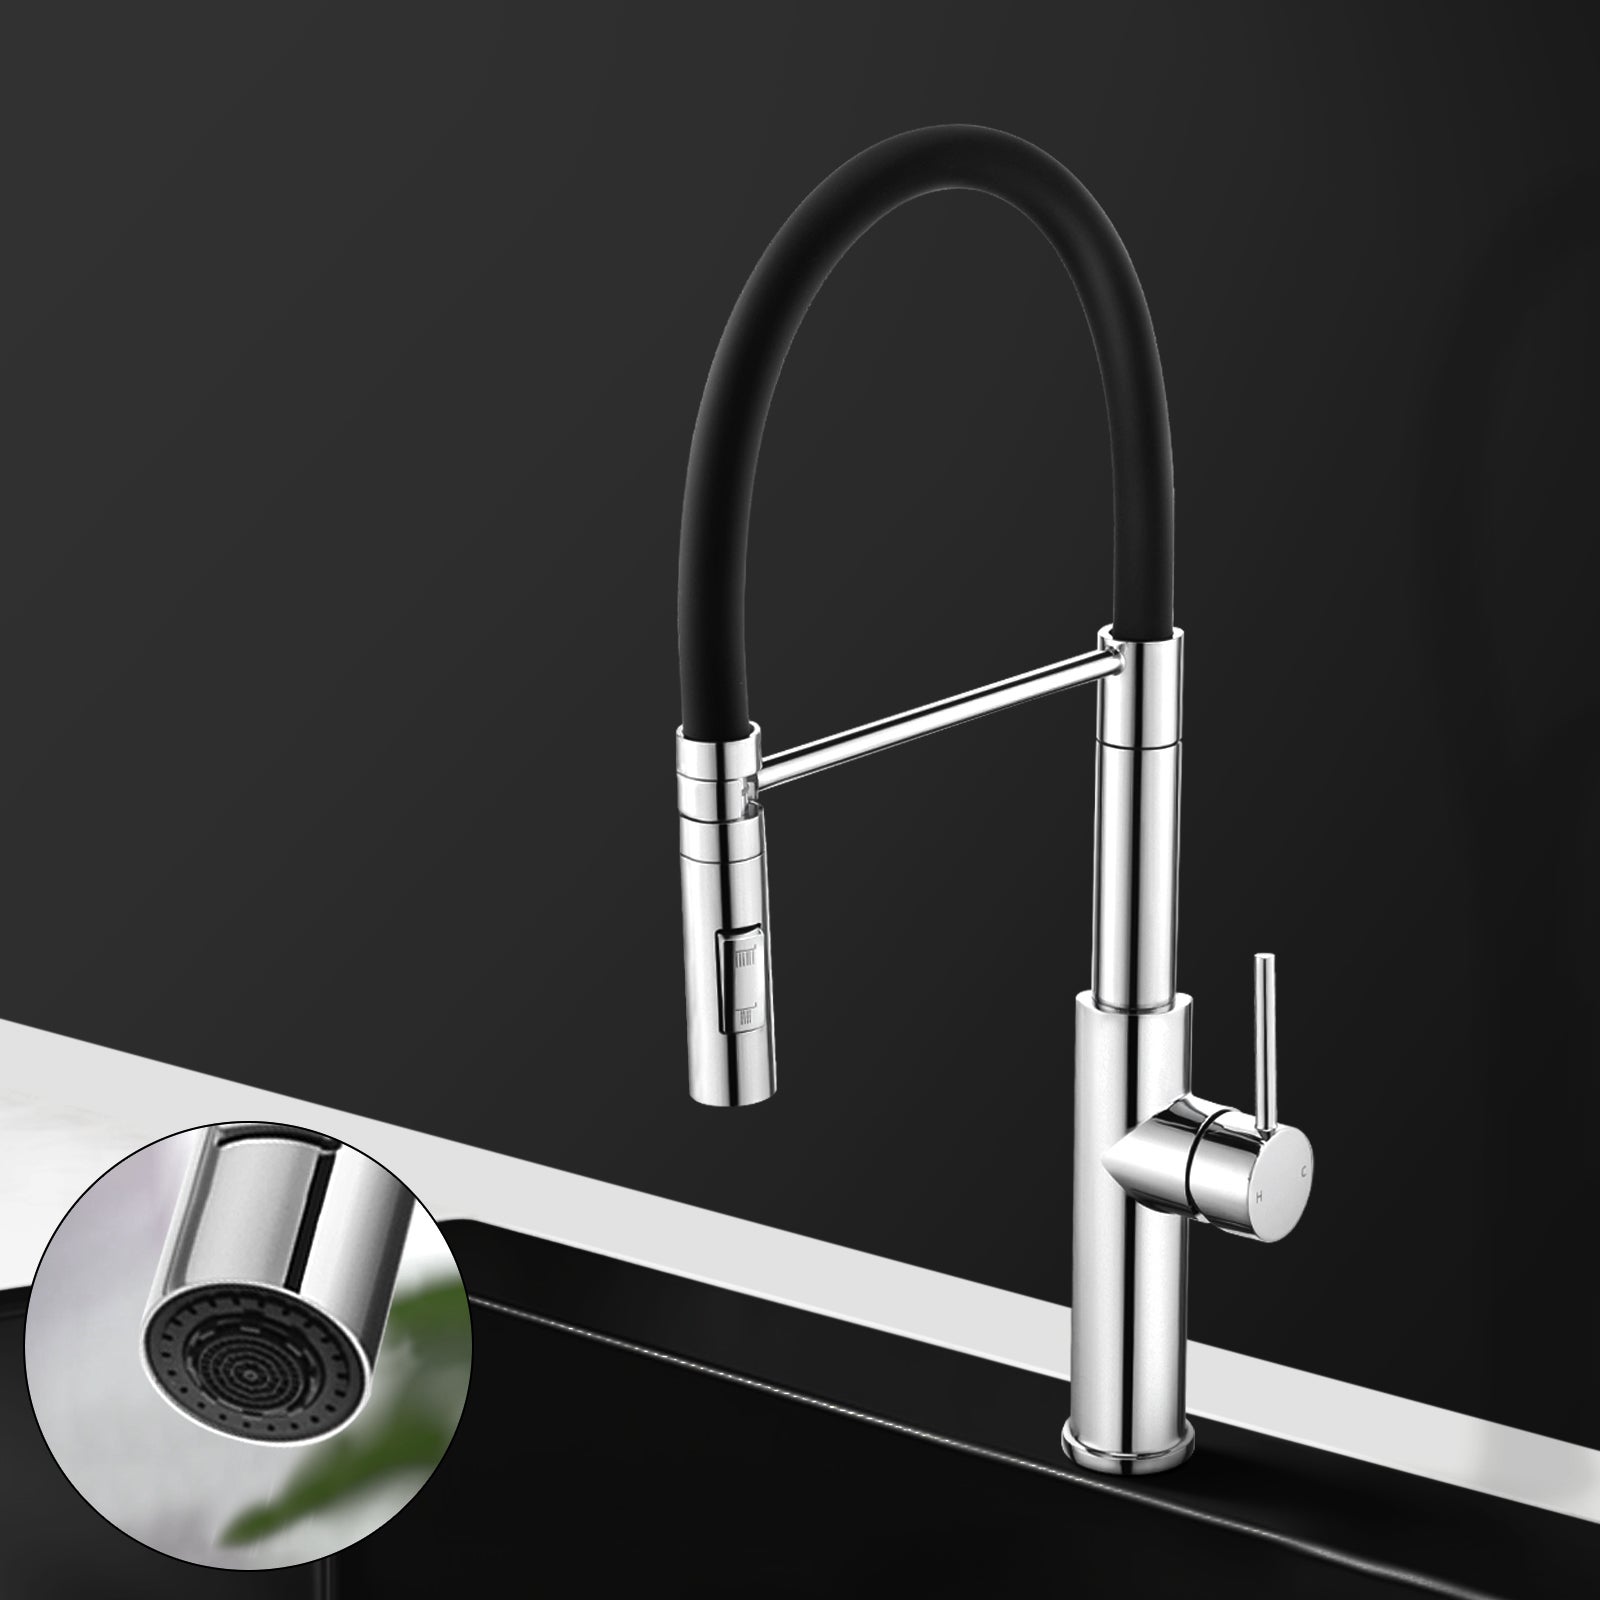 Round Pull Out Down Spray Kitchen Laundry Sink Mixer Tap Faucet